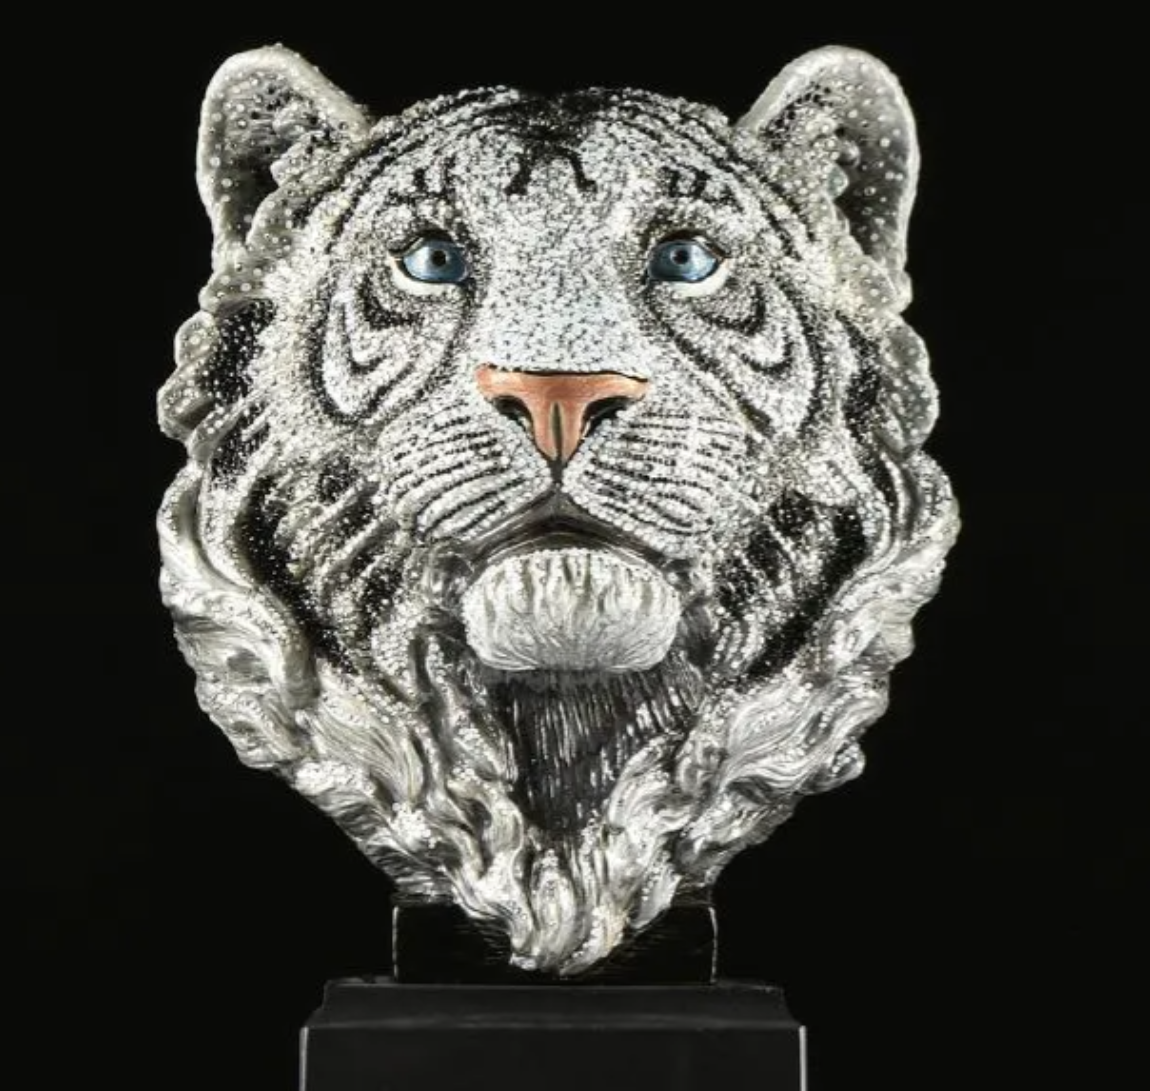 A jeweled aluminum bust of a tiger, enameled and covered with more than 10,000 Swarovski crystals, made $5,000 plus the buyer’s premium in May 2019. Image courtesy of Simpson Galleries, LLC and LiveAuctioneers.